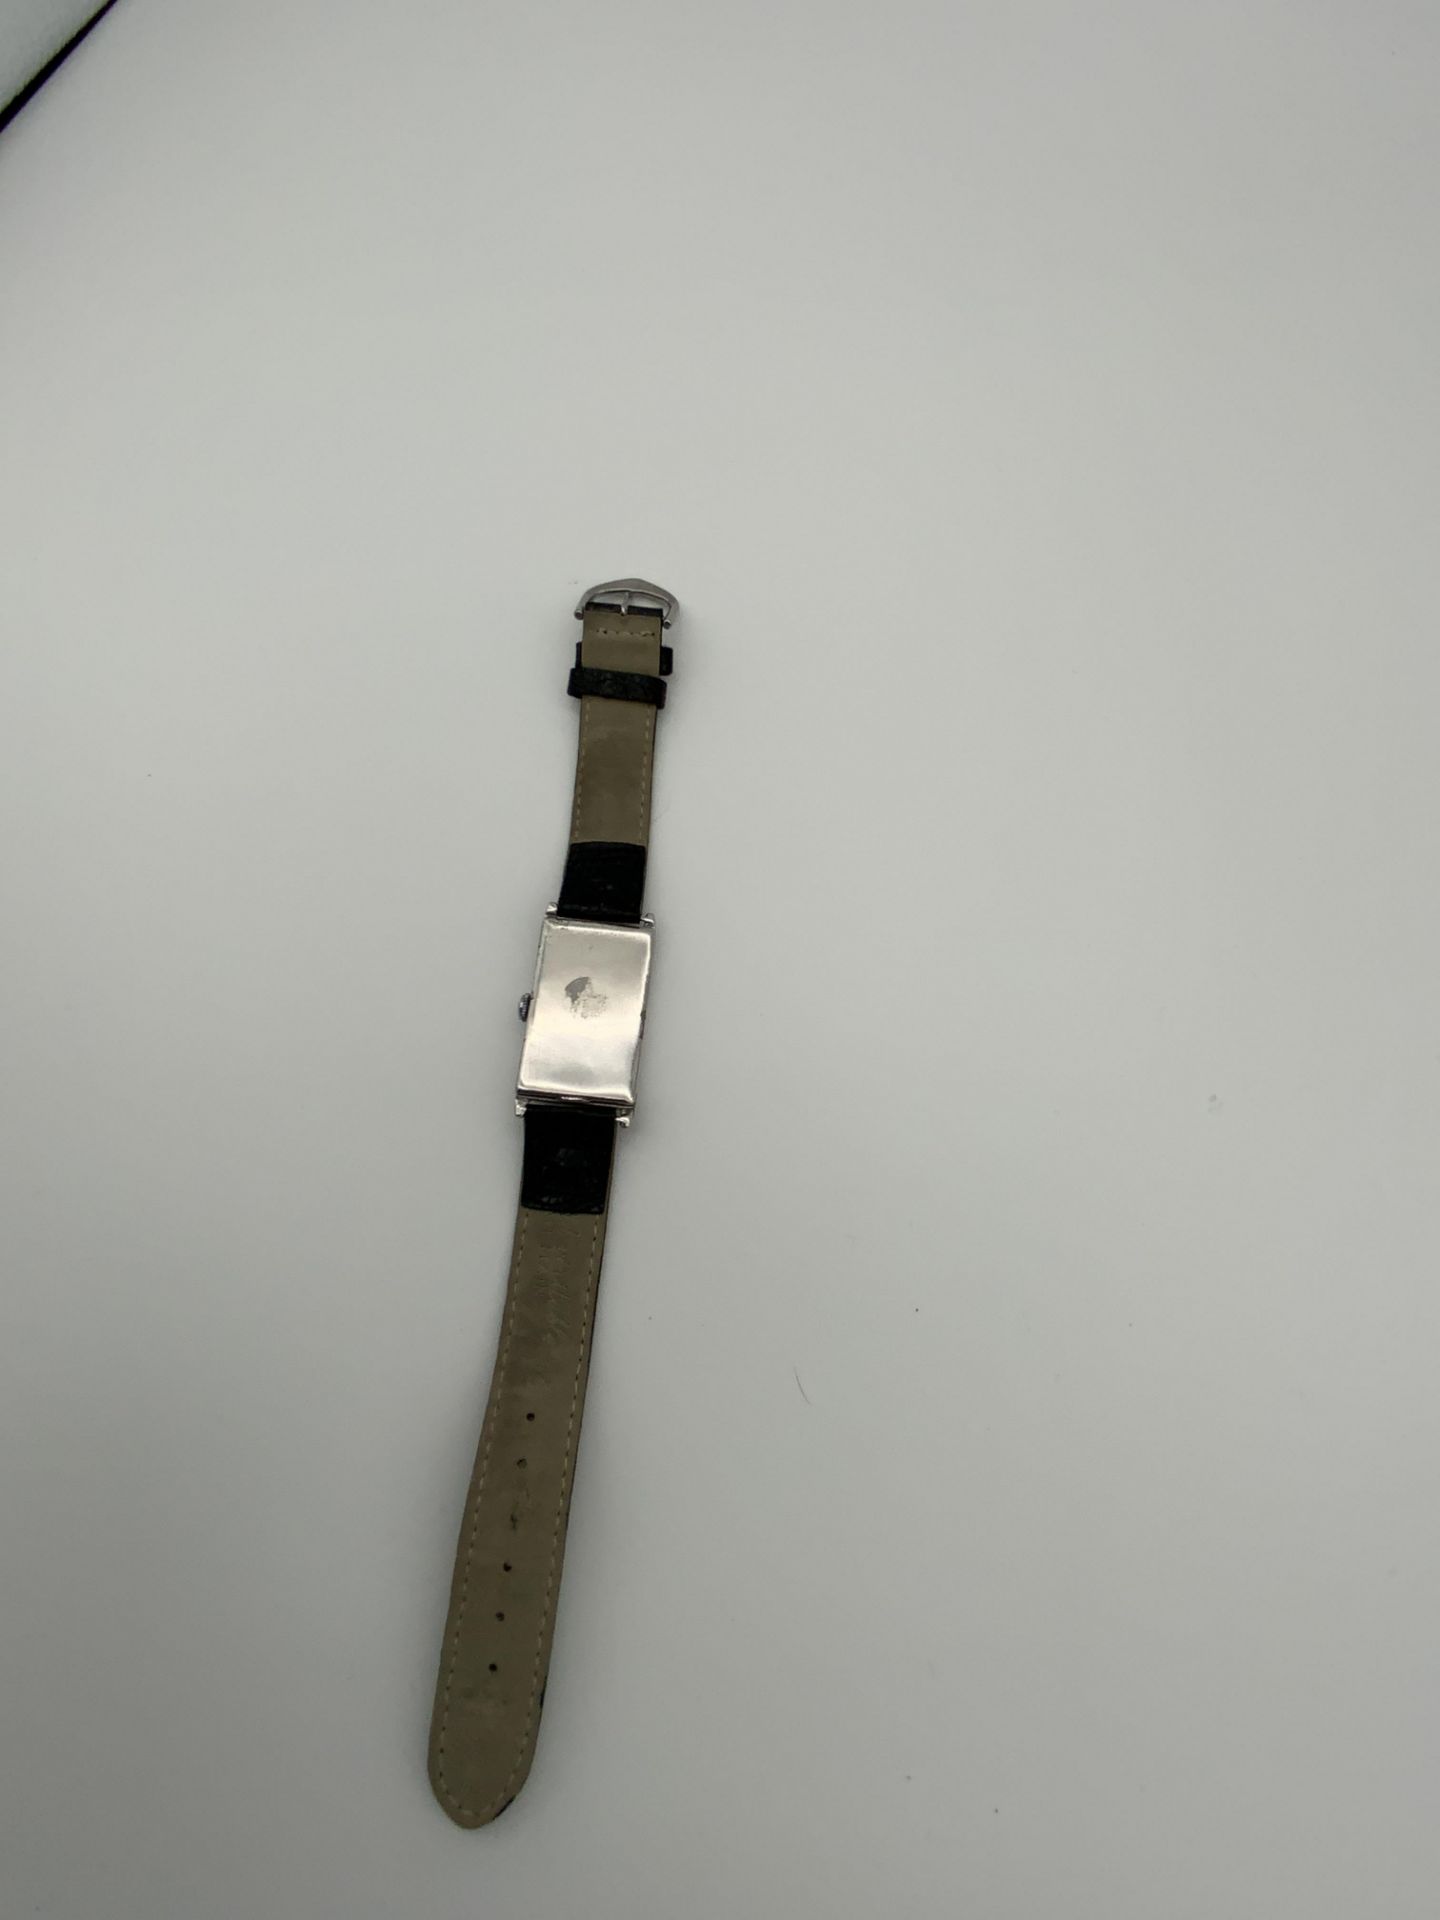 STAINLESS STEEL LIP WATCH - Image 7 of 7